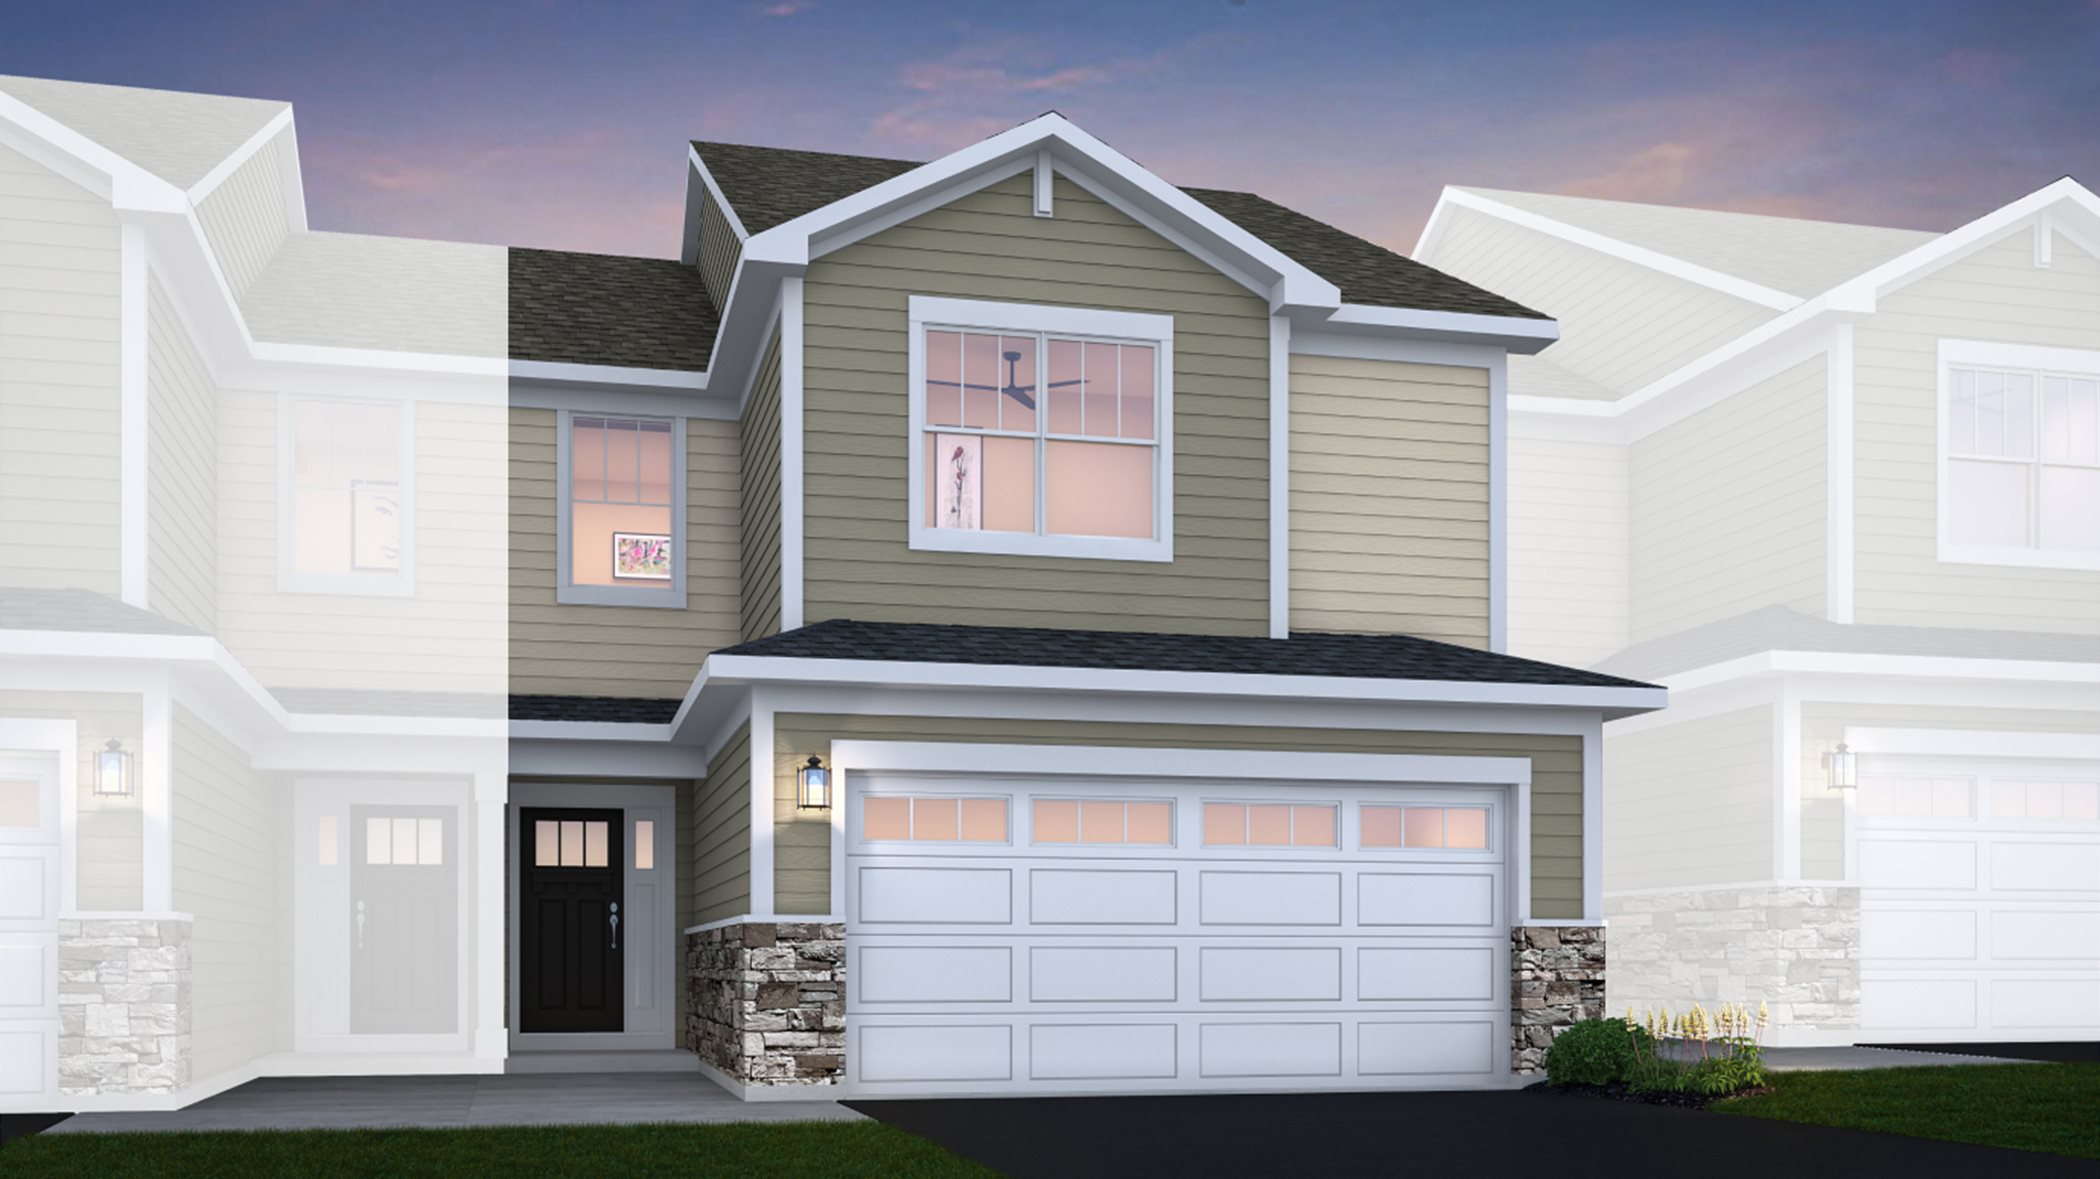 Crossings-of-Mundelein Traditional Townhomes Charlotte ei A